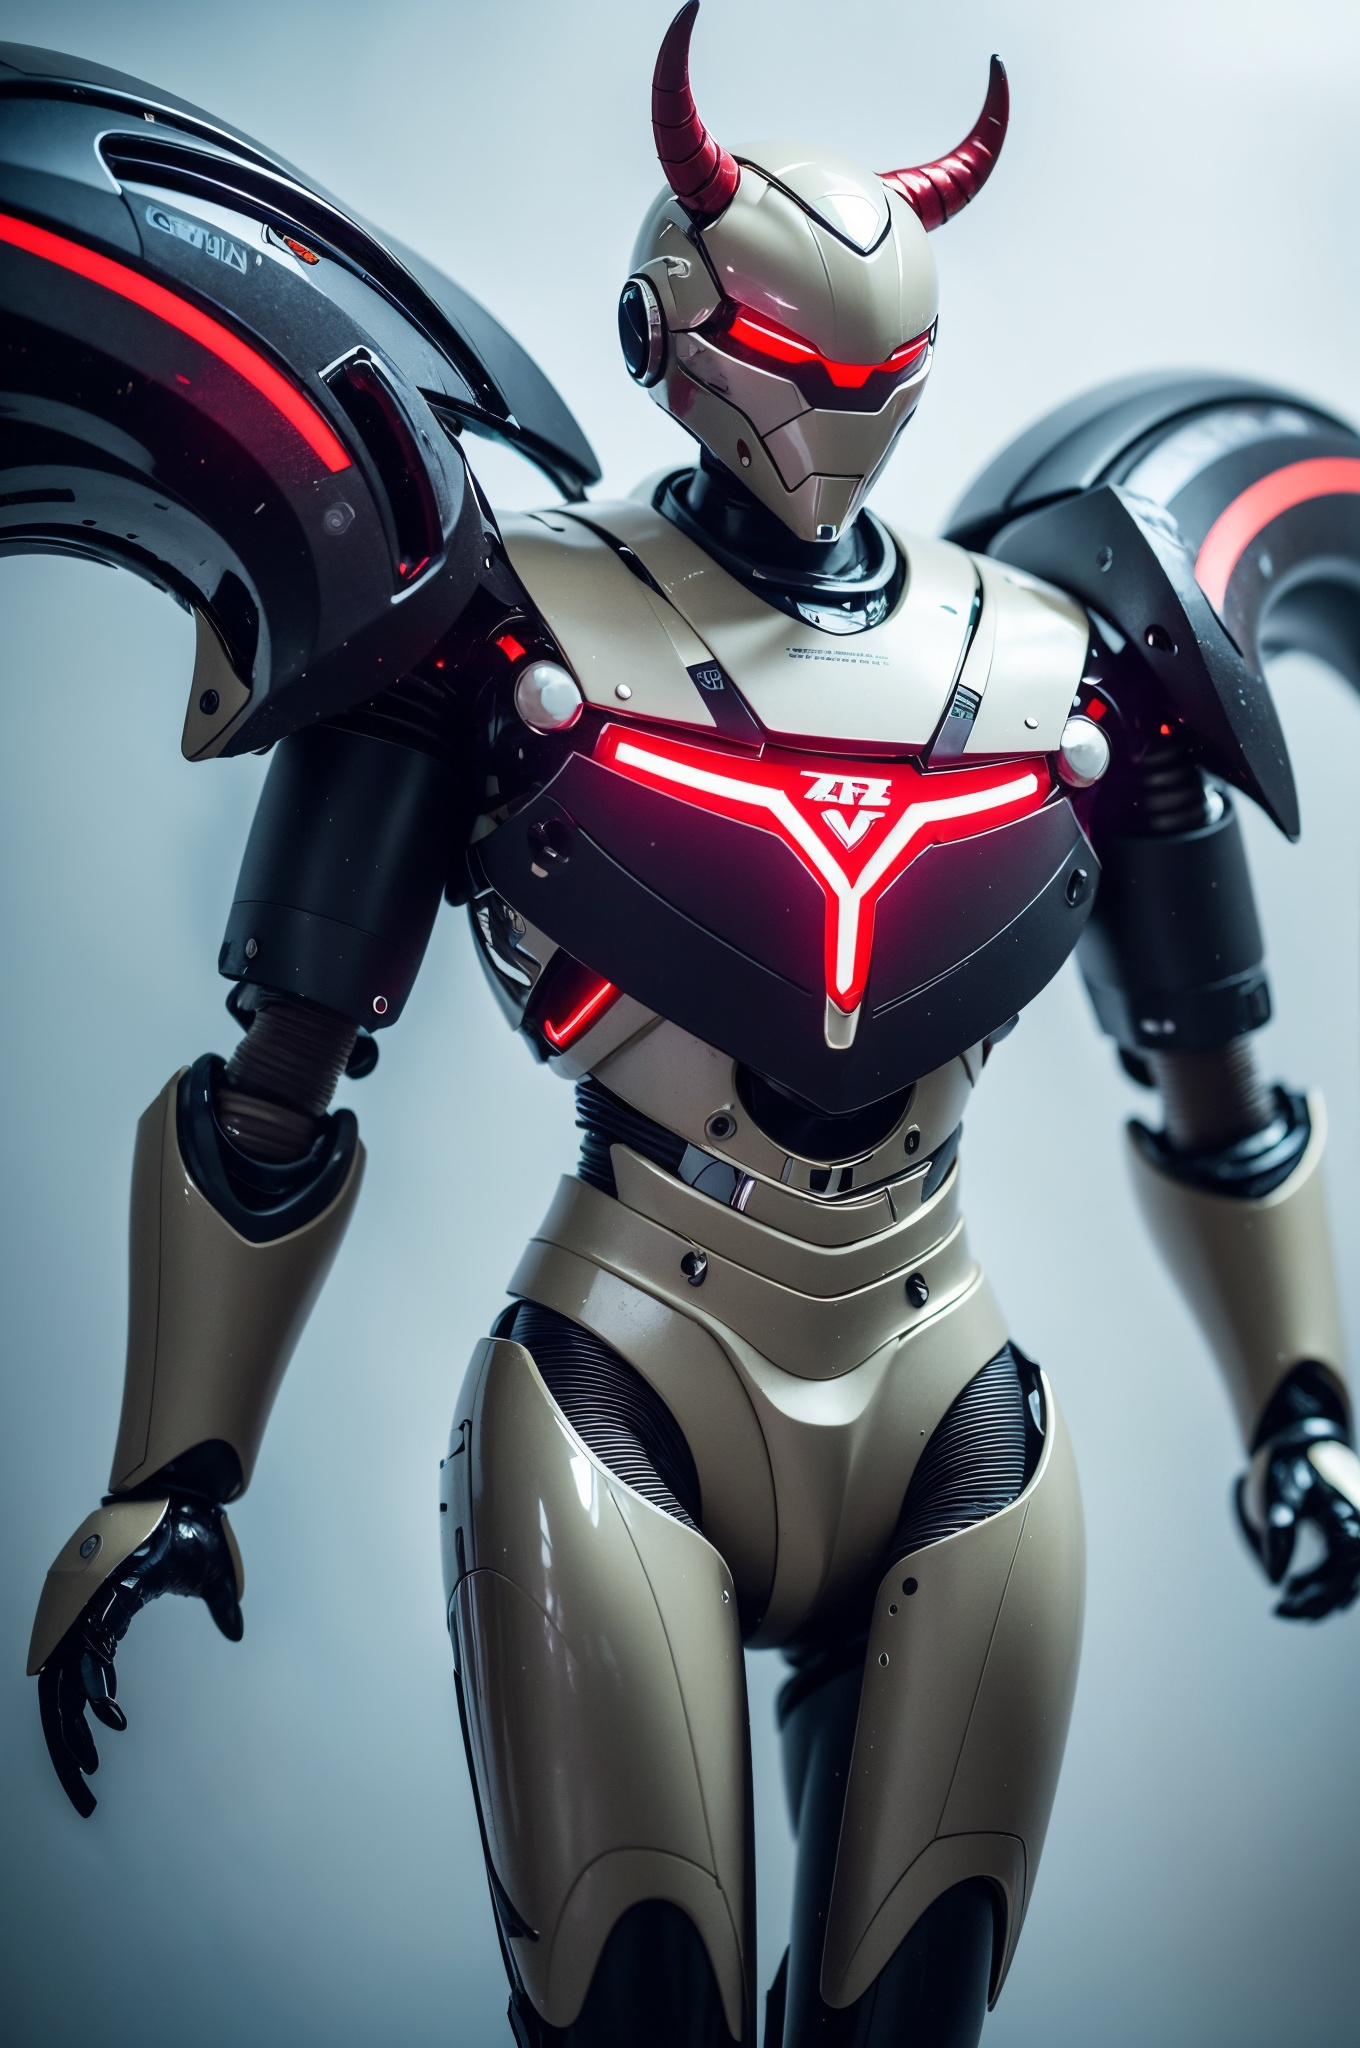 A futuristic robot designed with the characteristics of the Aries zodiac sign, maintaining the sleek design with glossy white and red armor. The robot's head is styled to subtly suggest a ram's horns, an iconic feature of Aries, while its posture exudes strength and confidence. It stands against a clean black background, with delicate lighting that casts a heroic silhouette., located deep aesthetic, intricate, elegant, sharp focus, cinematic, unique, detailed, rich bright colors, contemporary, stunning, attractive, illustrious, sublime, smart, luxurious, pretty, color balanced, dramatic ambient light, dynamic composition, magical, thought, beautiful, marvelous, splendid, perfect, romantic, positive